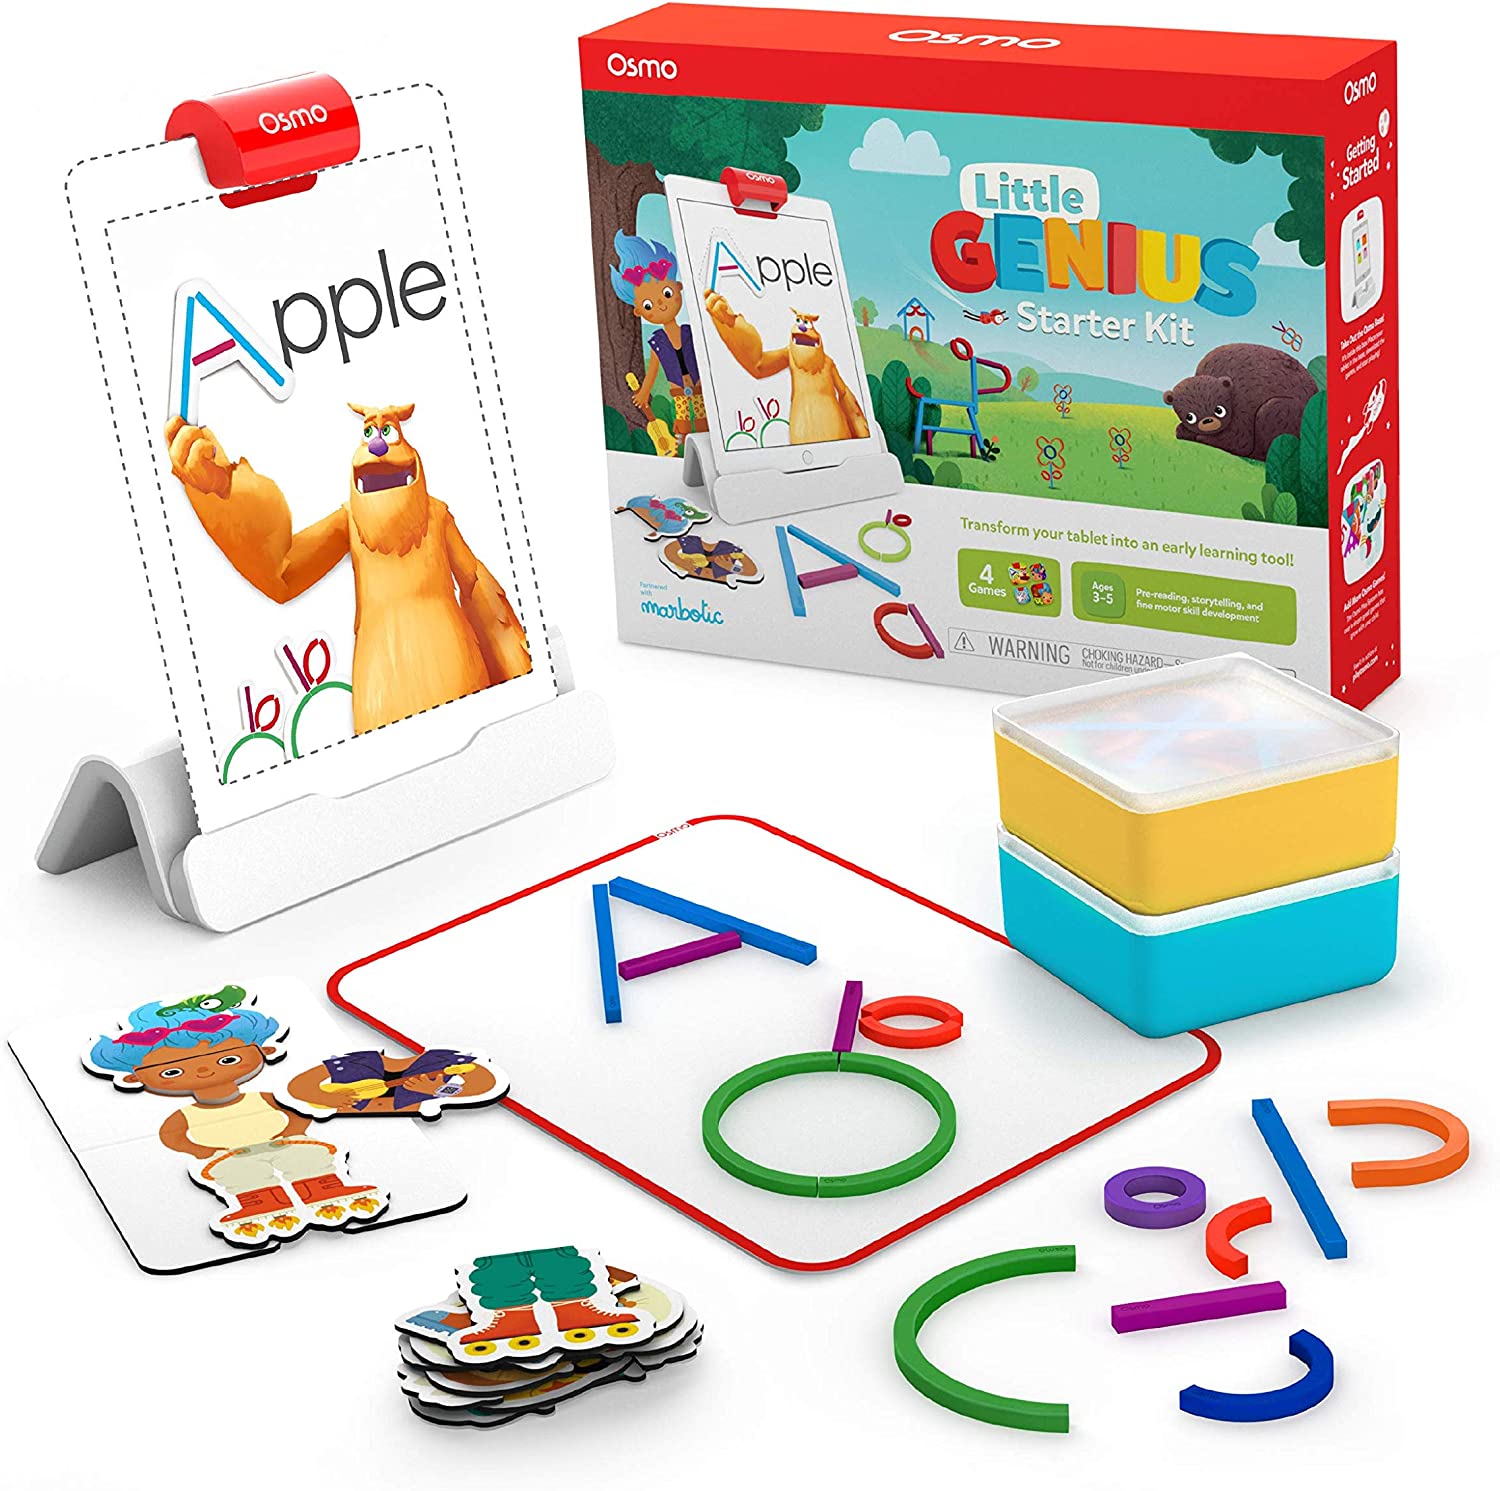 gifts-for-3-year-old-osmo